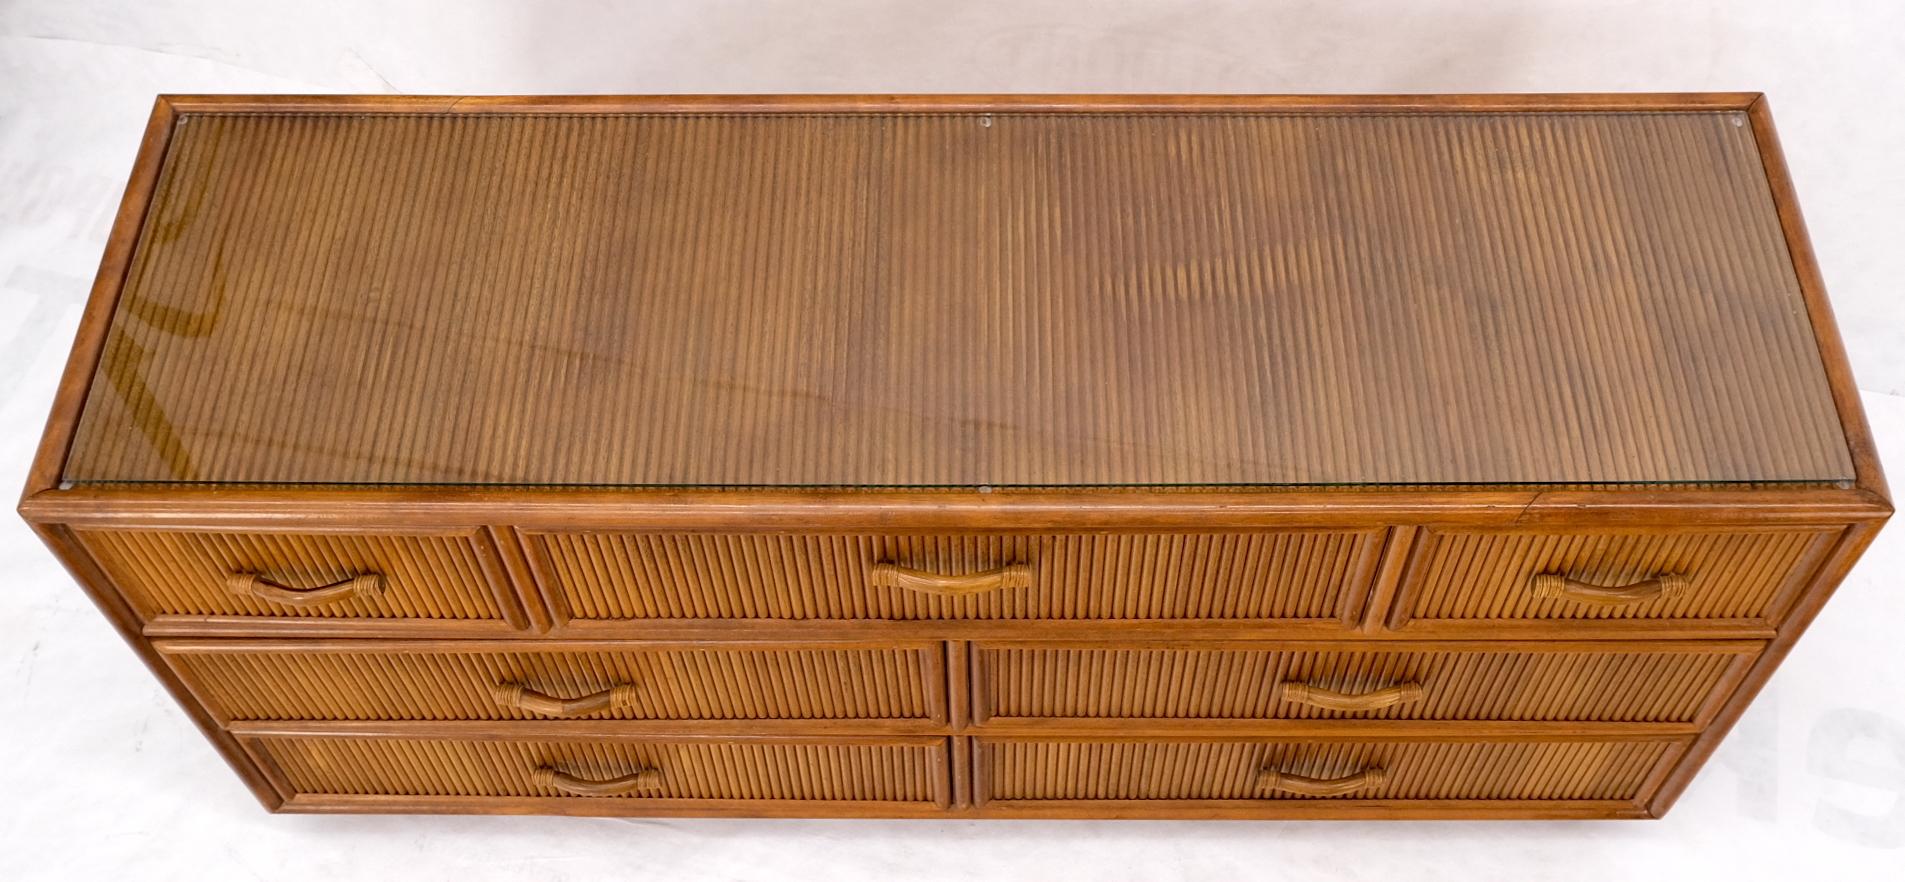 Very clean organic pencil reed style 7 drawers dresser credenza.